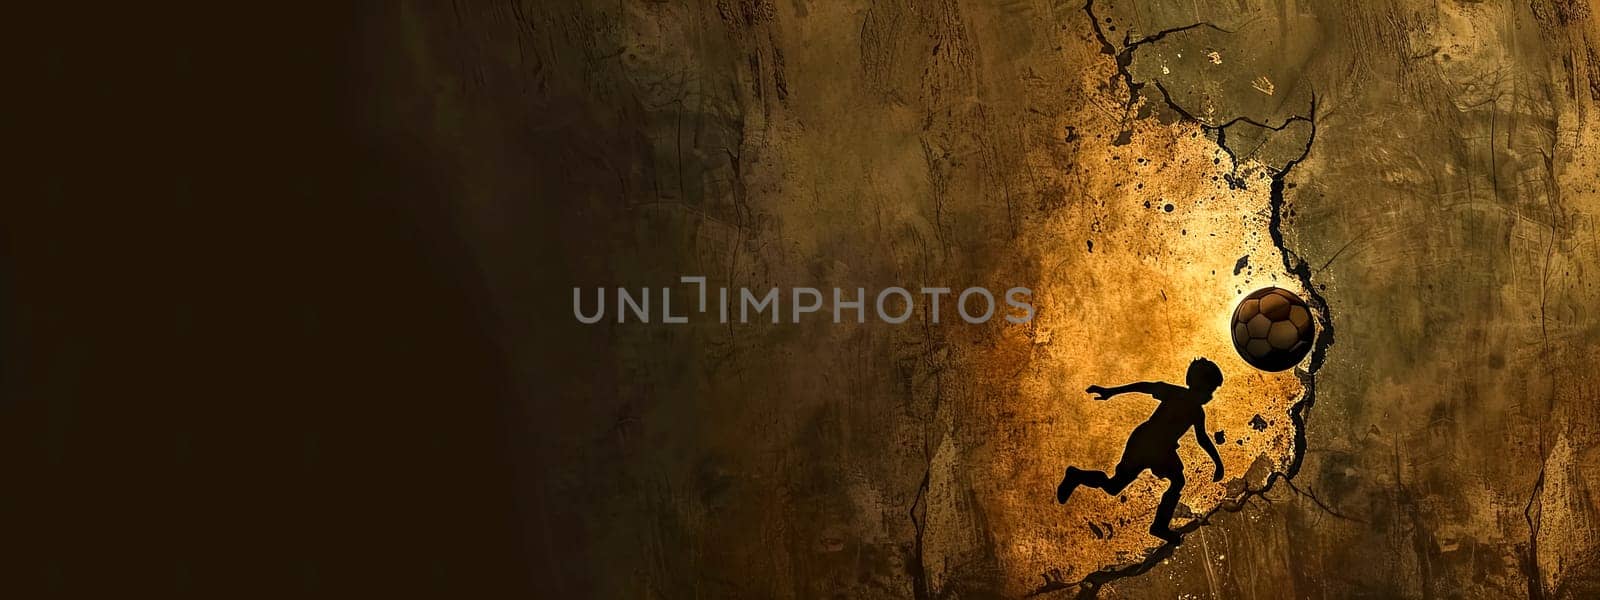 Dynamic silhouette of a soccer player and ball against a cave wall background. copy space